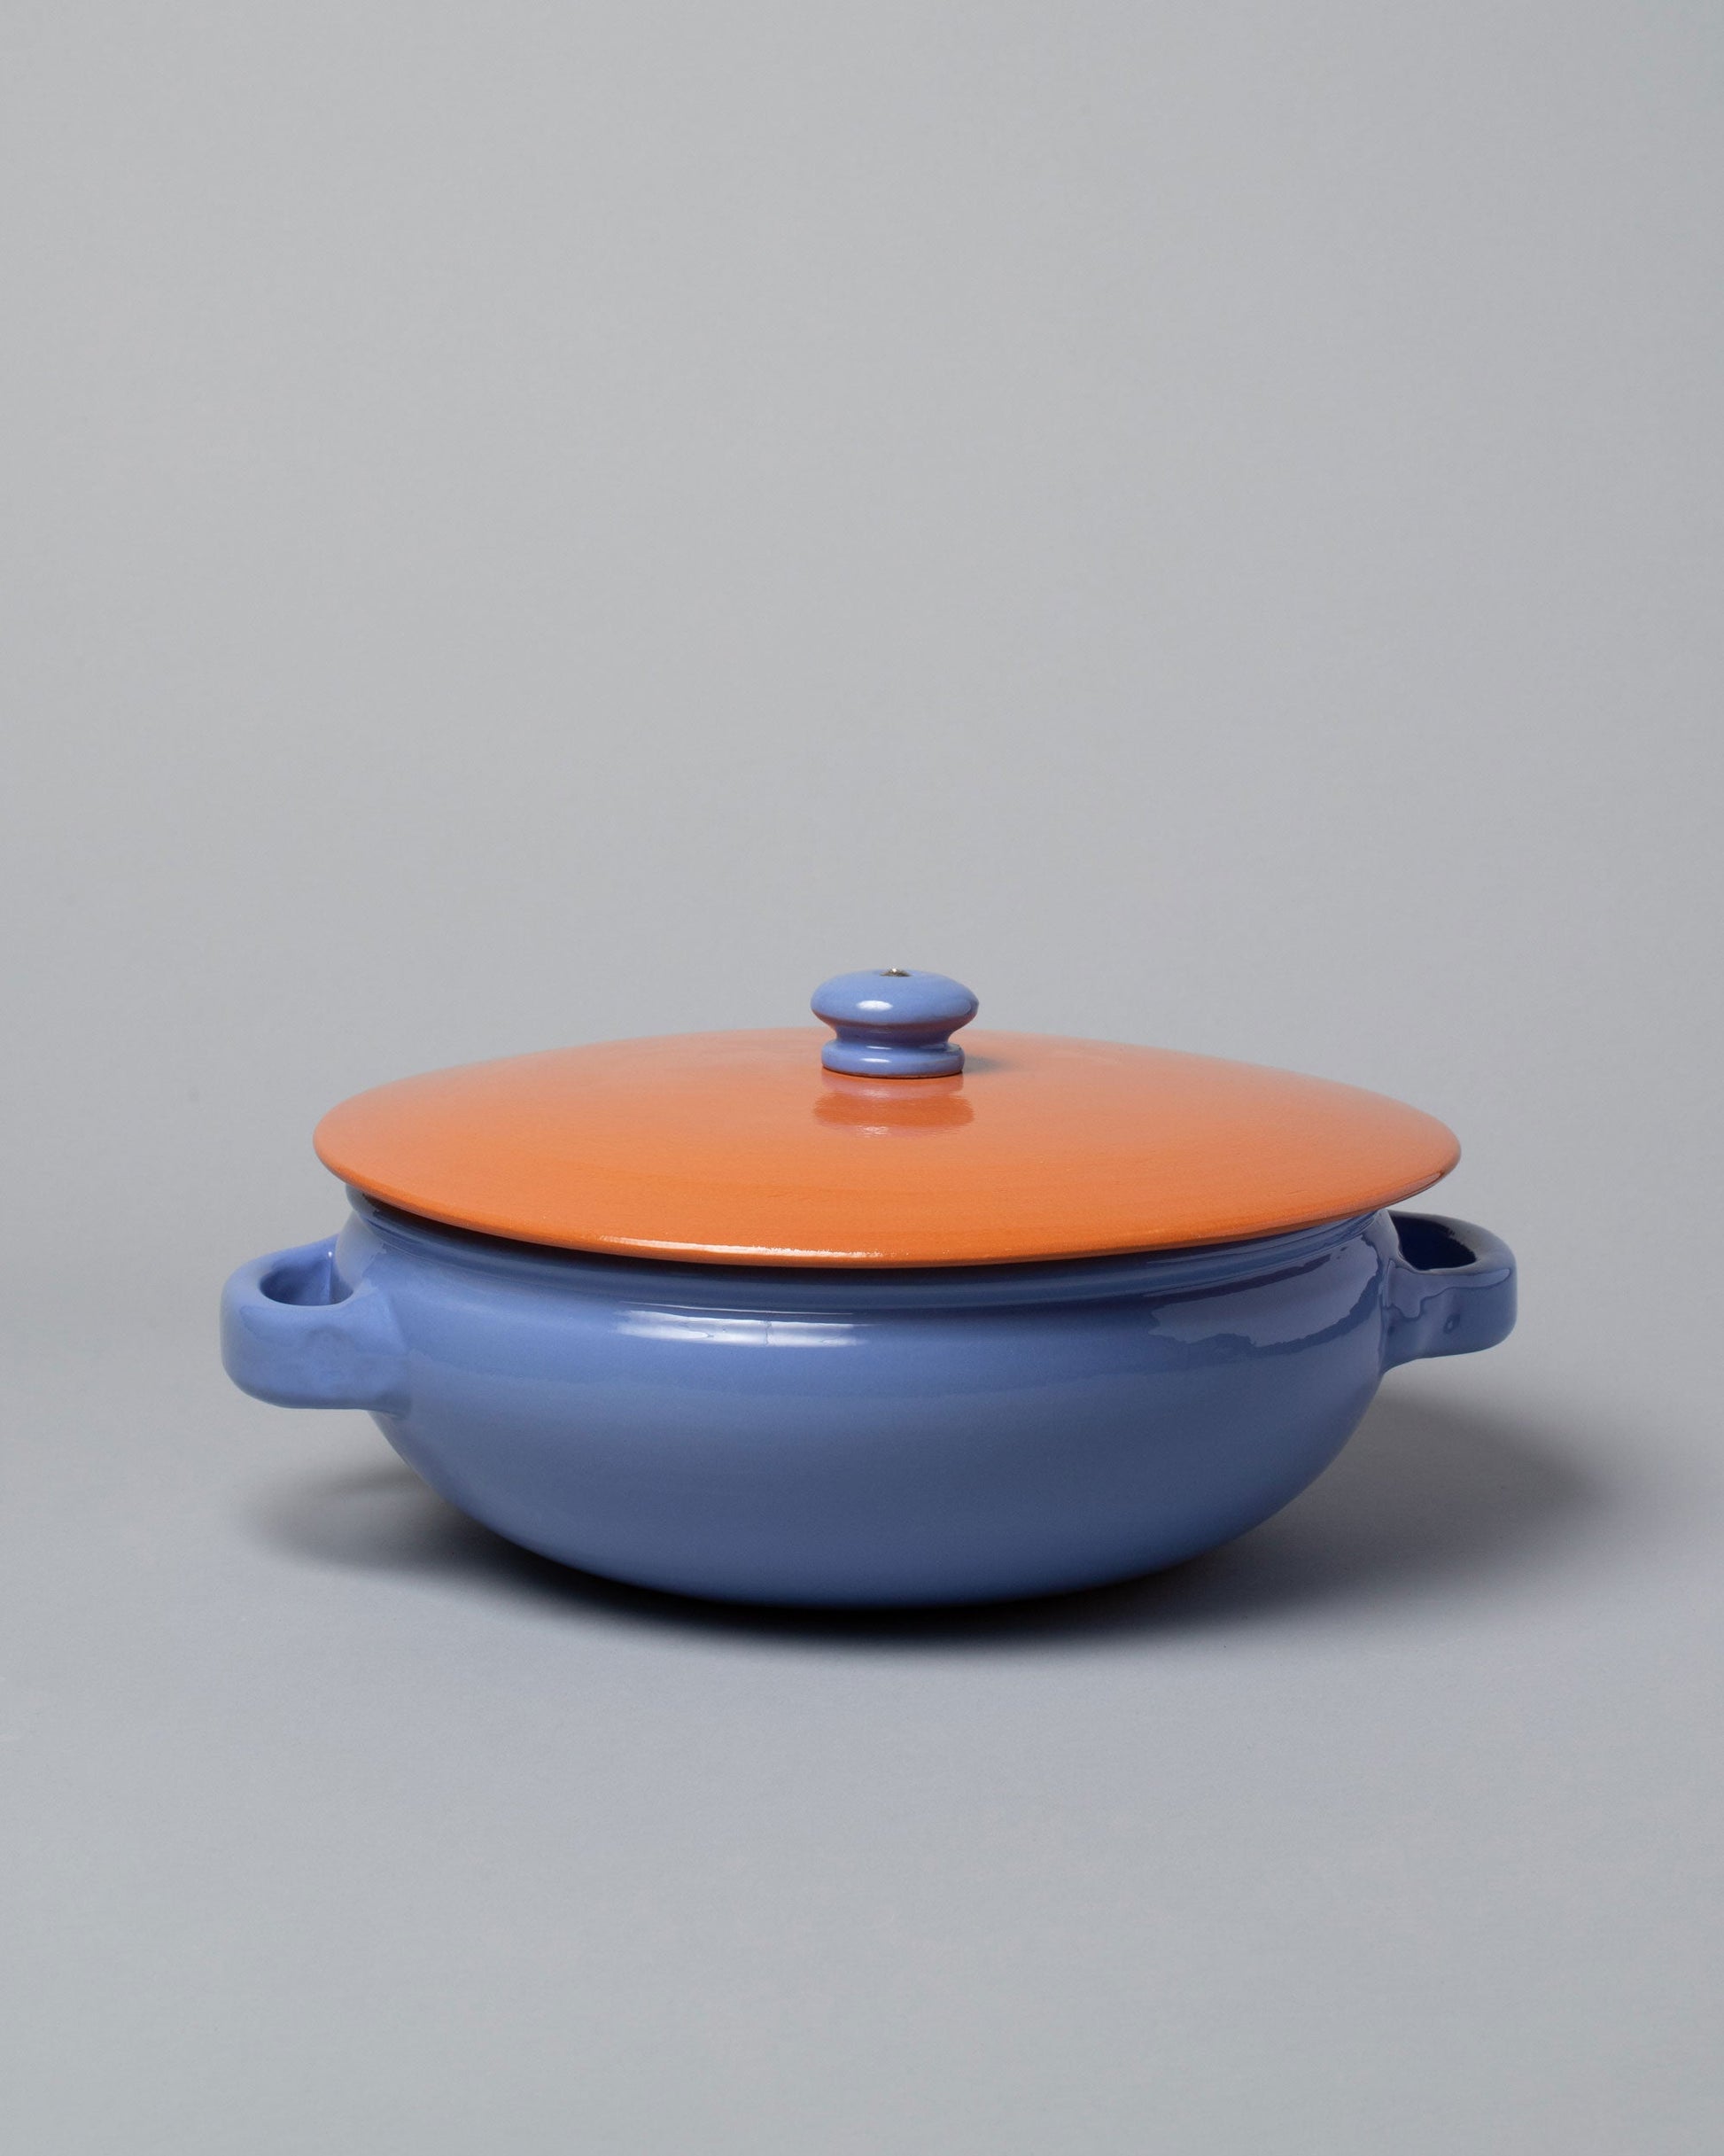  Mazzotti 1903 Small Light Blue and Orange Clay Pot on light color background.